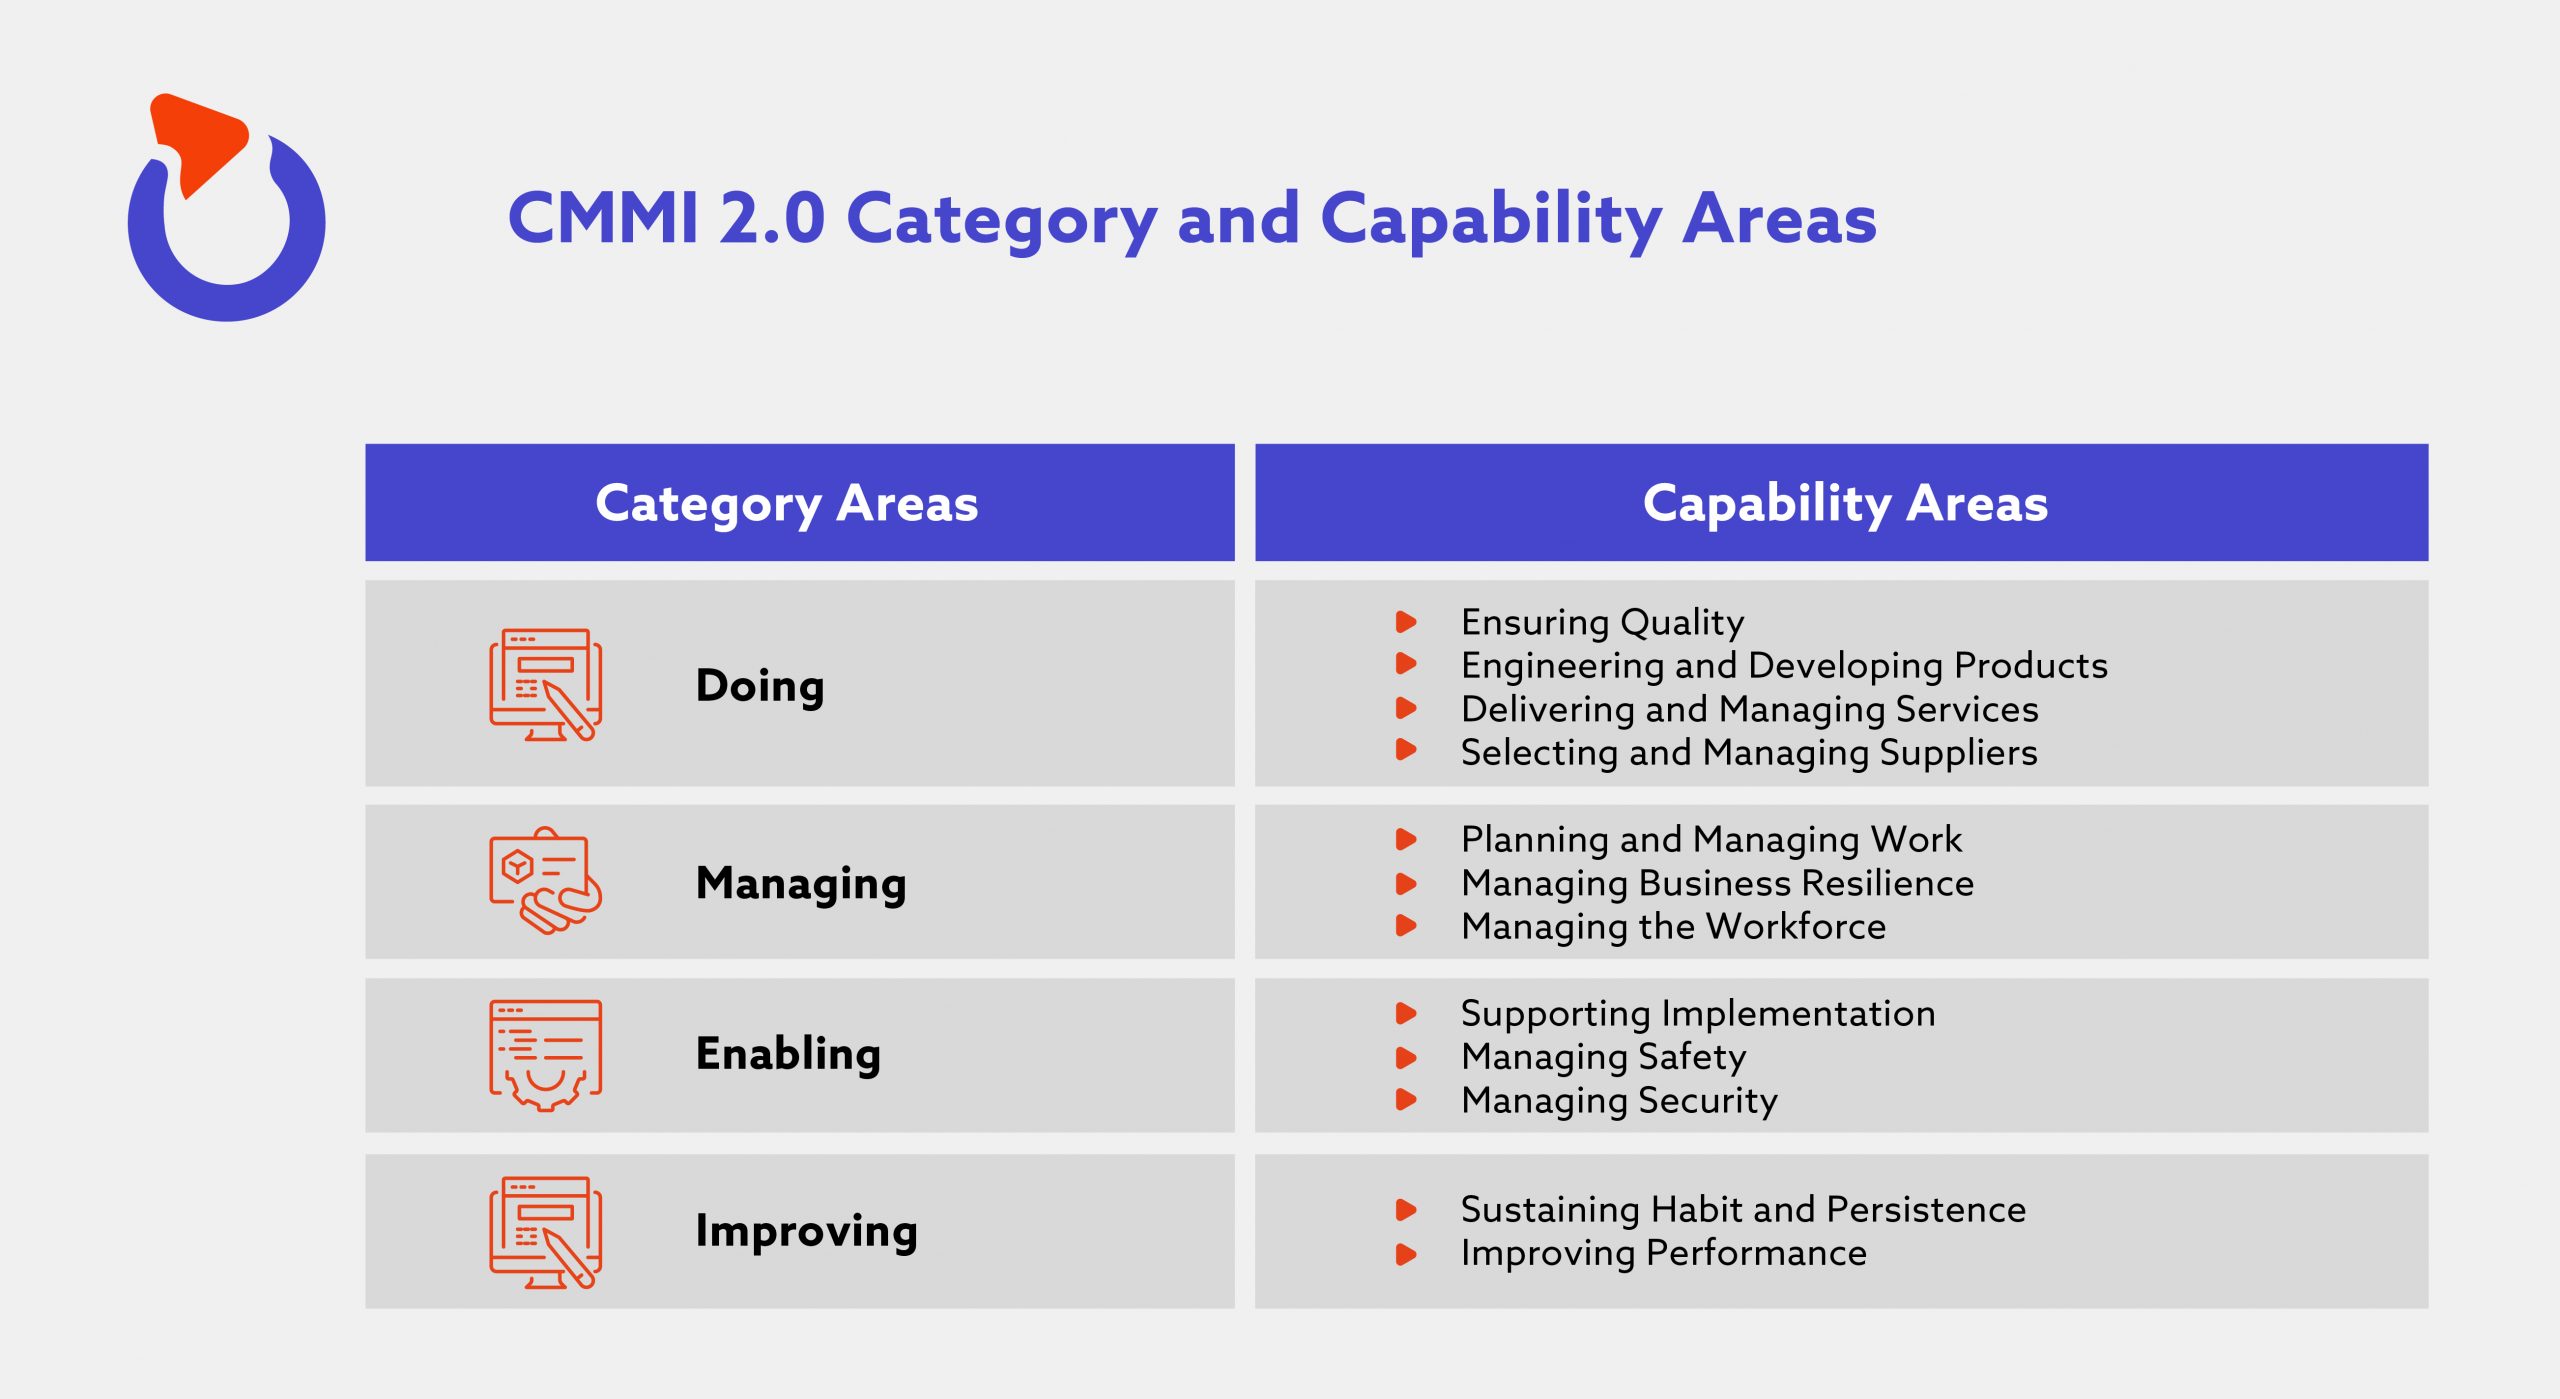 CMMI 2.0 Category Areas and Capability Areas